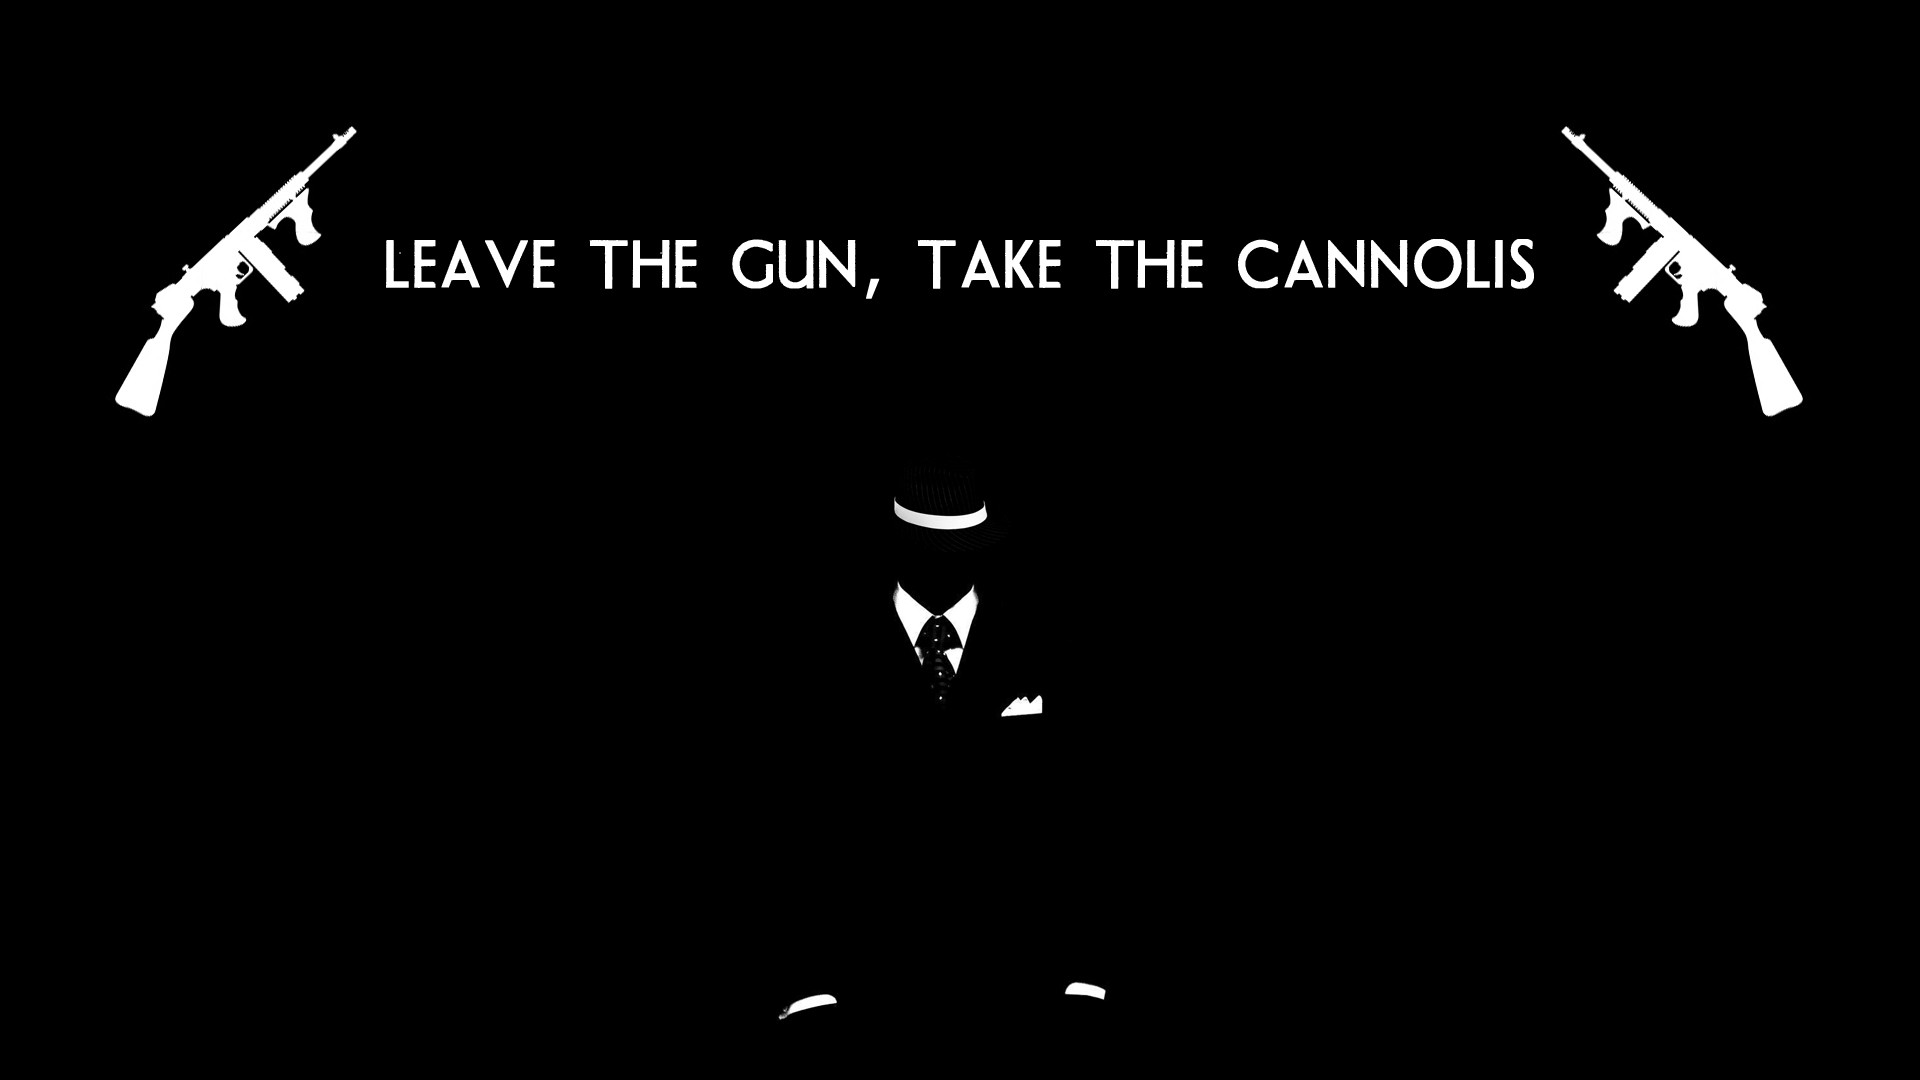 Movies Mafia Weapons Text Quotes Statements Humor Wallpaper Background